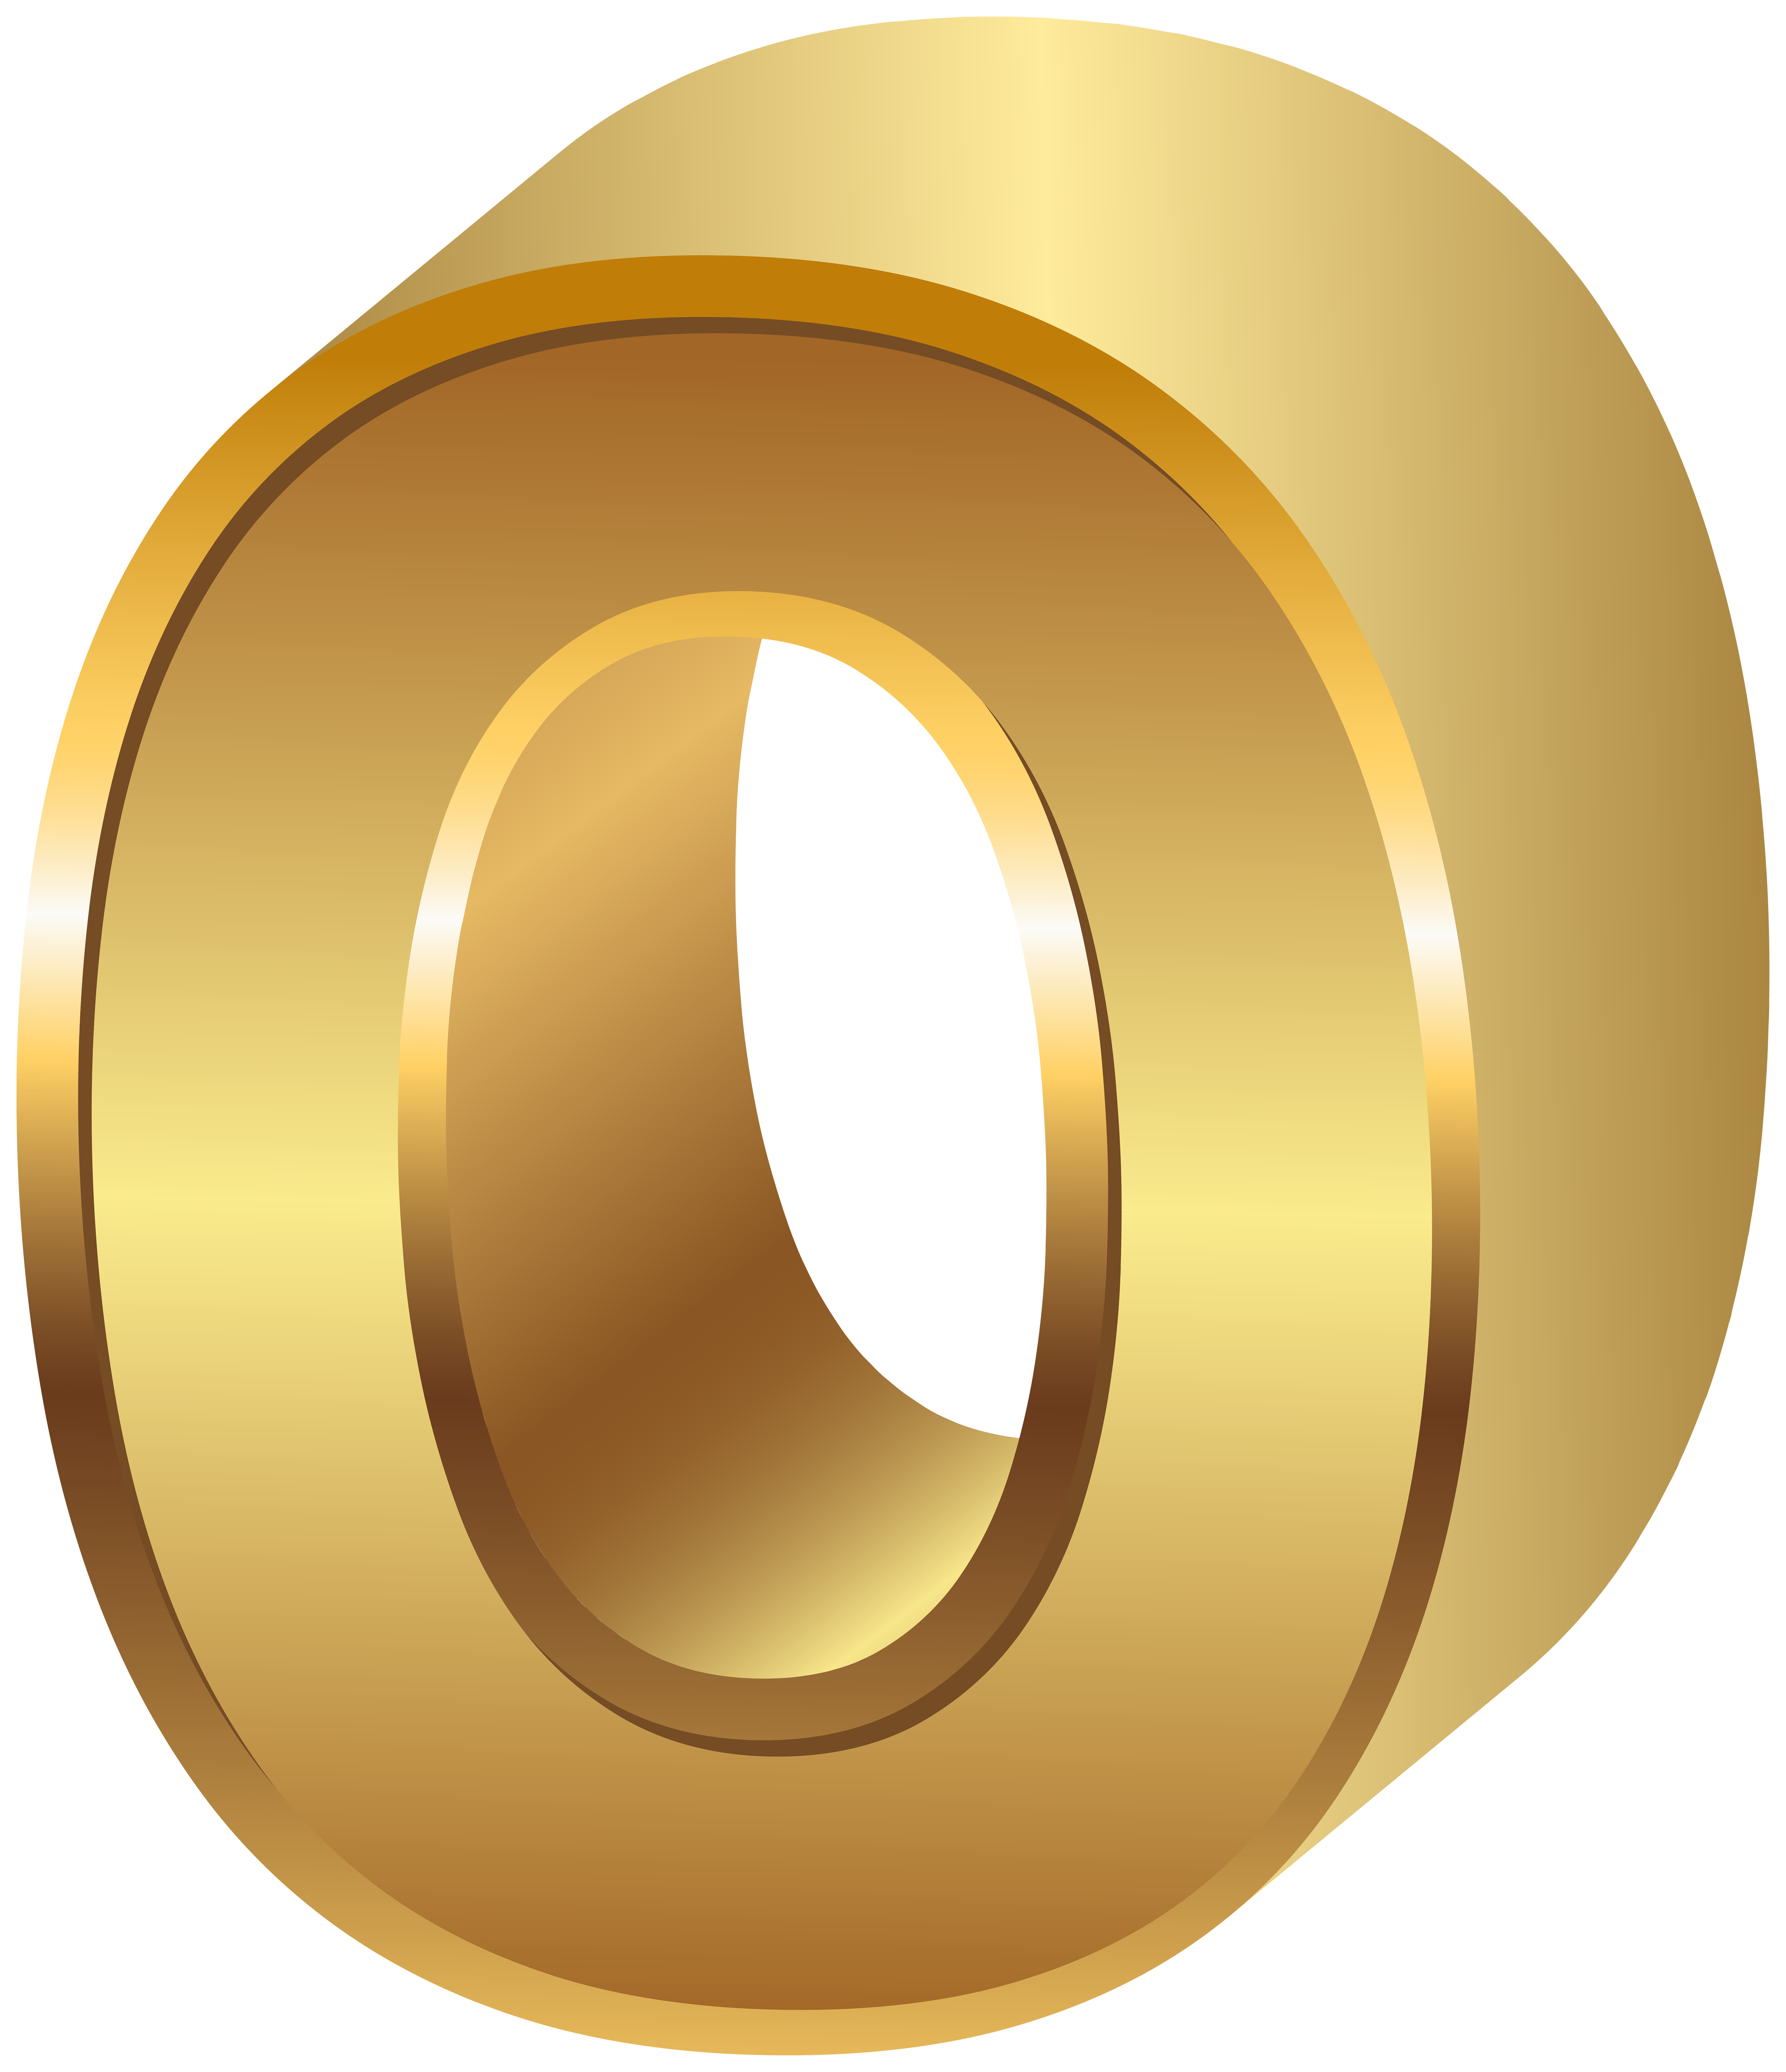 Number 0 Transparent PNG Images, Zero Free Download, 0 PNG - Free